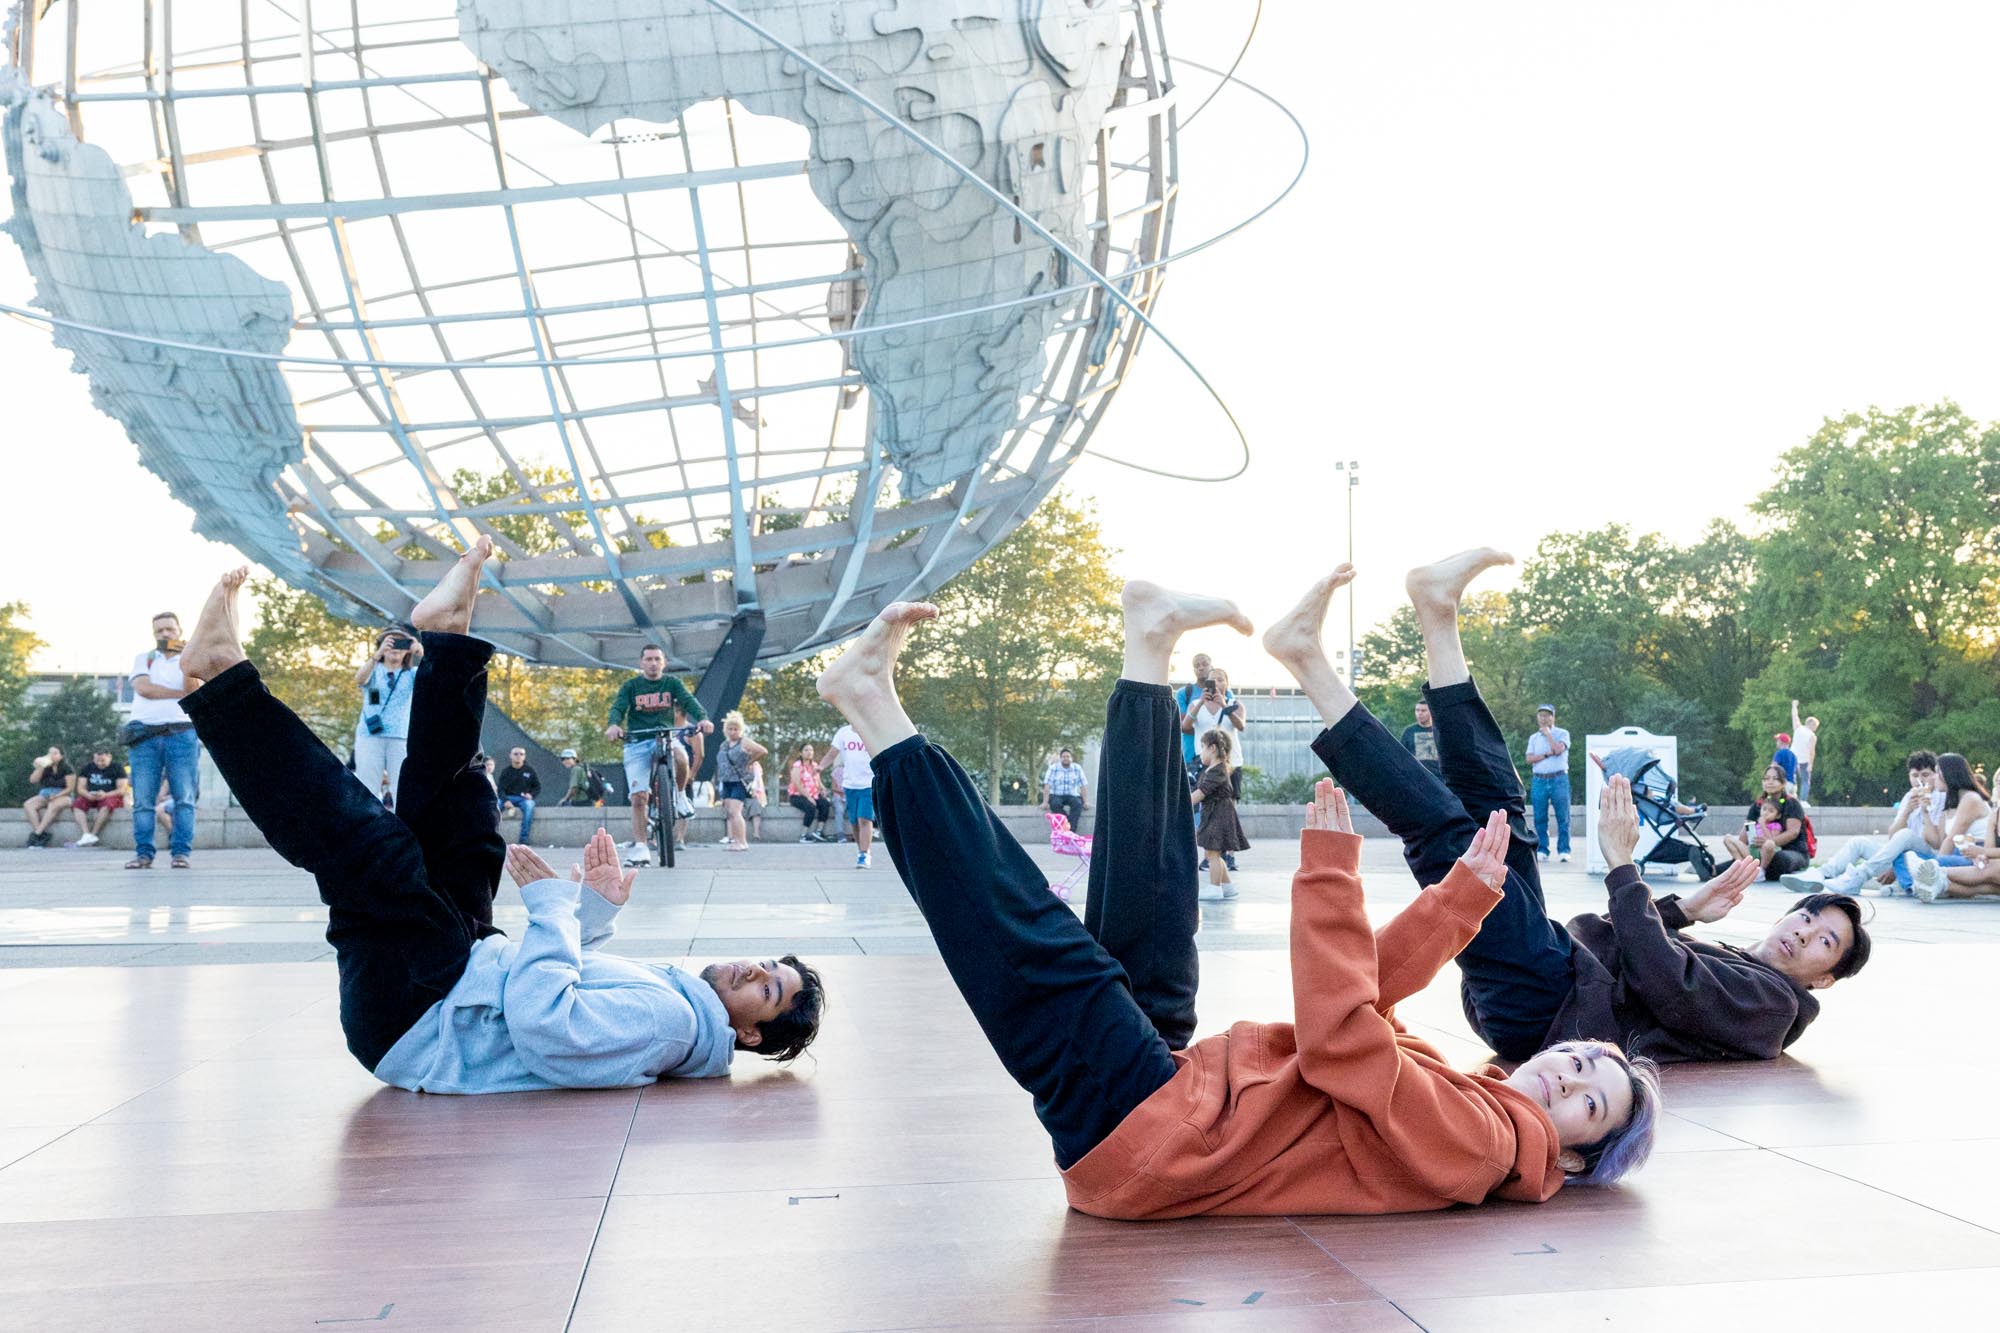 3 dancers on their back with feet and arms posed up, Unisphere in background